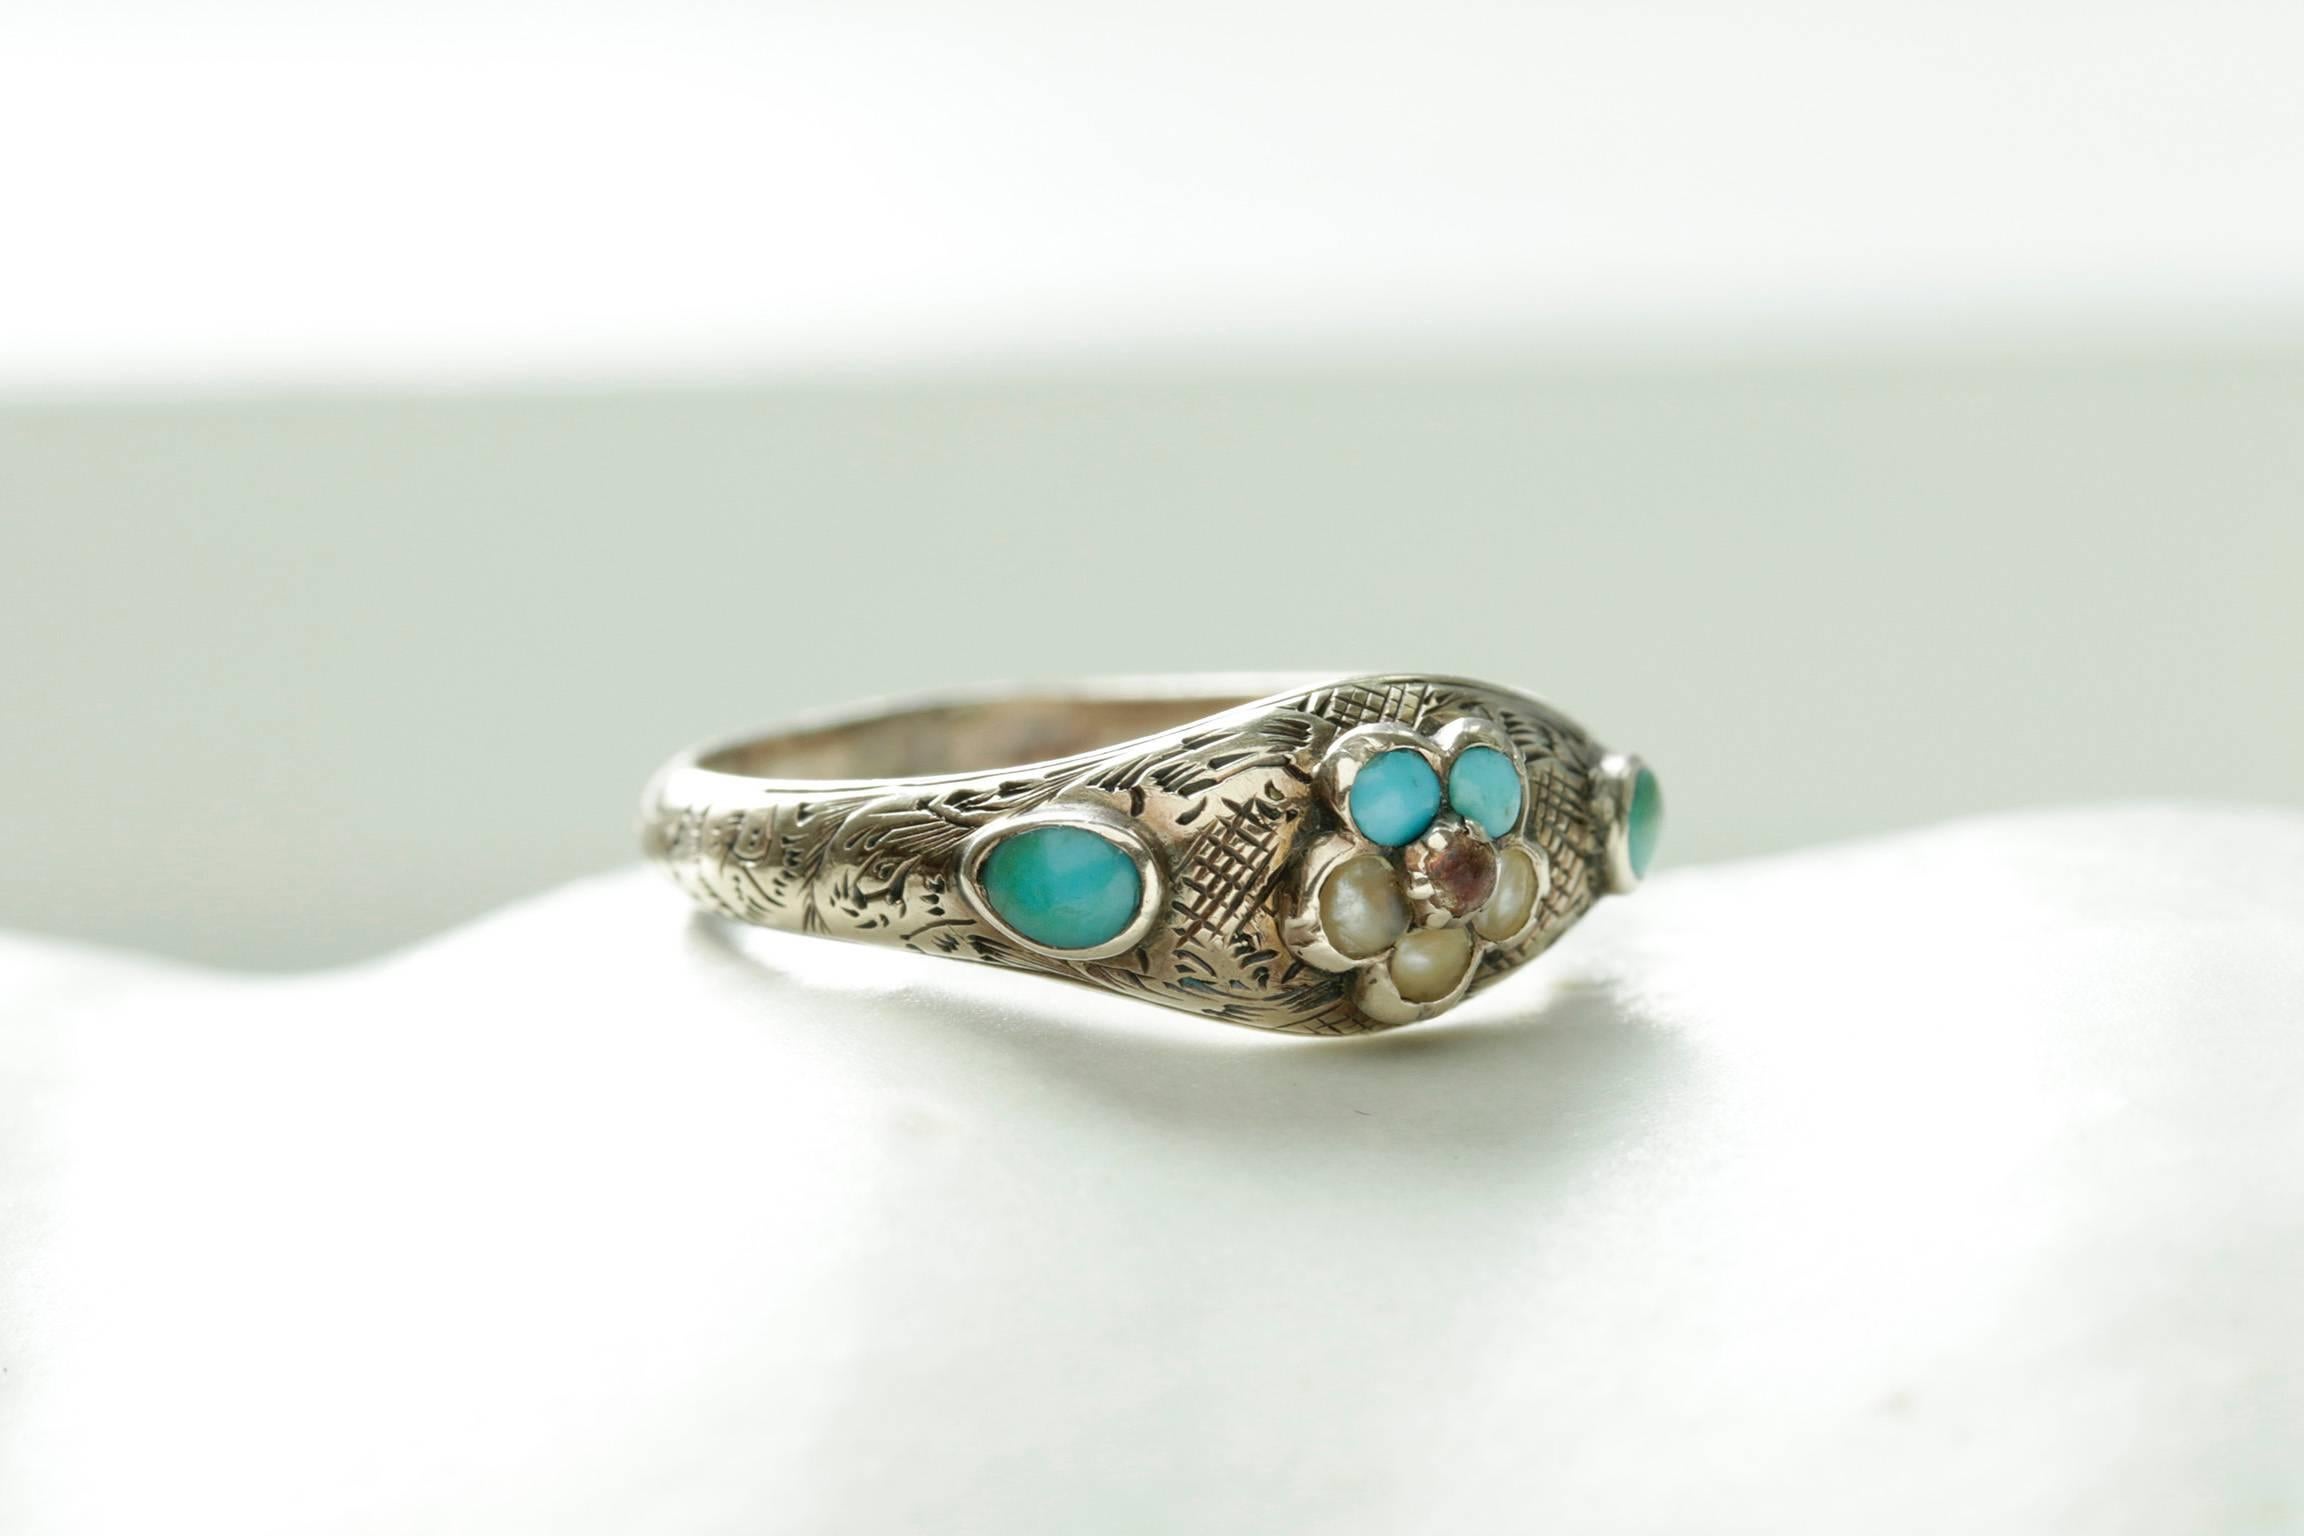 A very pretty late Georgian Forget Me Not ring with beautiful engravings. The flower is set with two turquoise stones, three split pearls and a ruby paste in the center, and the extra turquoise stones on each side adorn the ring. The ring is in 9k